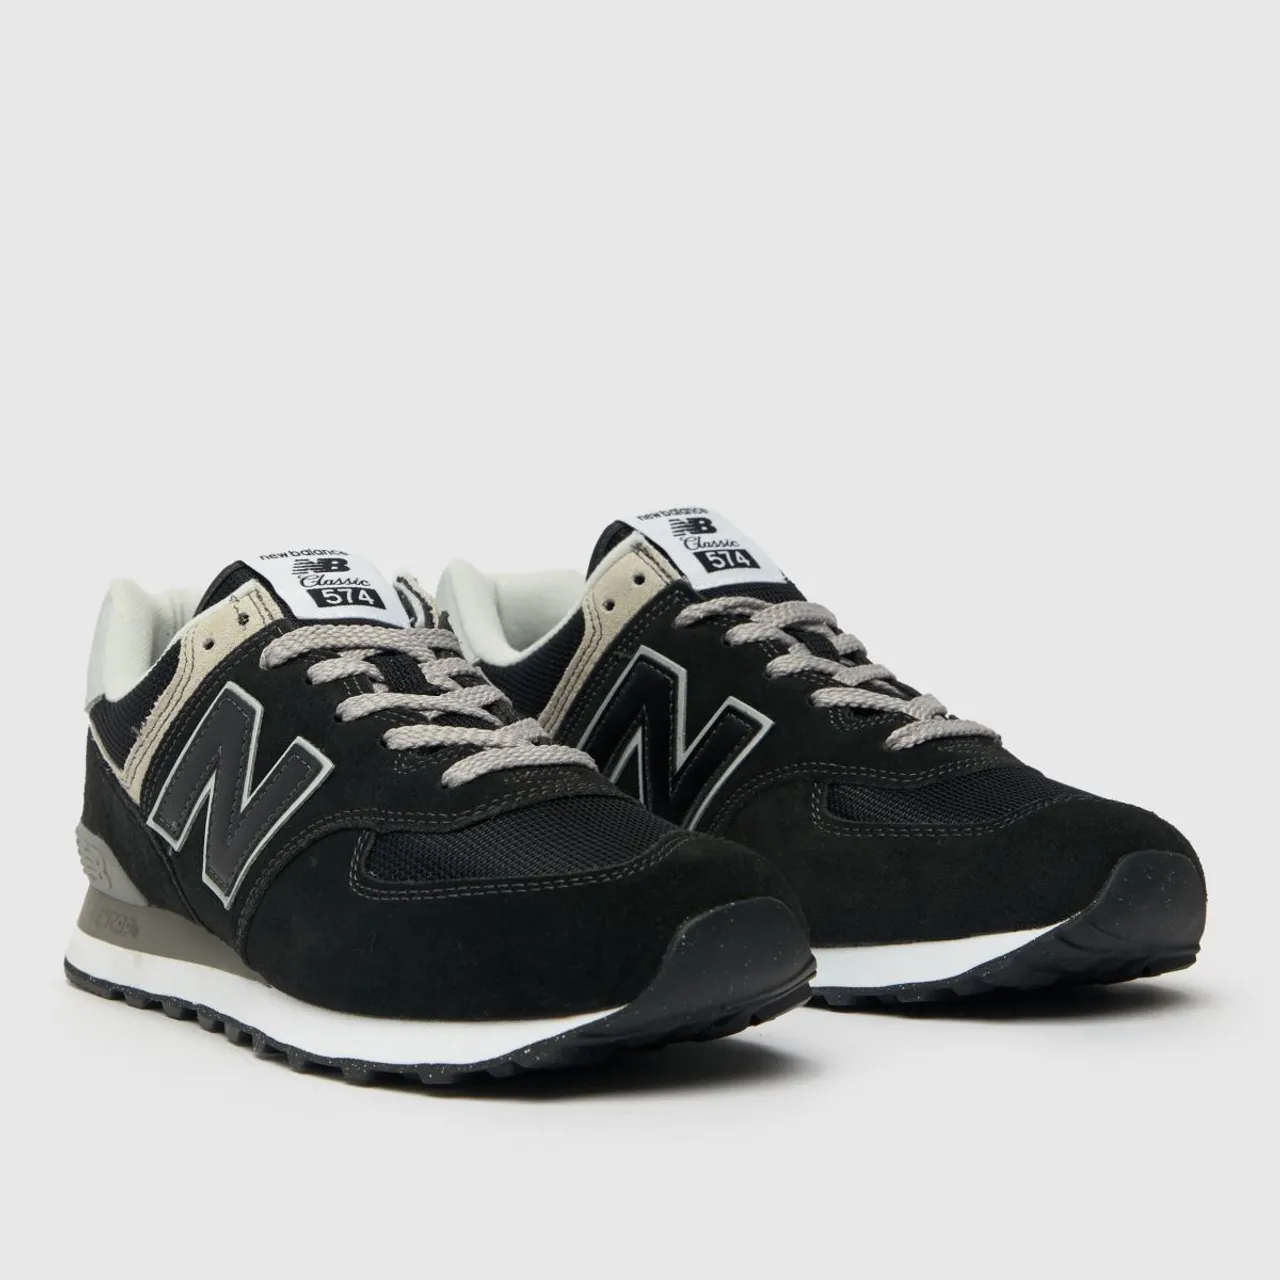 New Balance 574 Trainers In Black & White